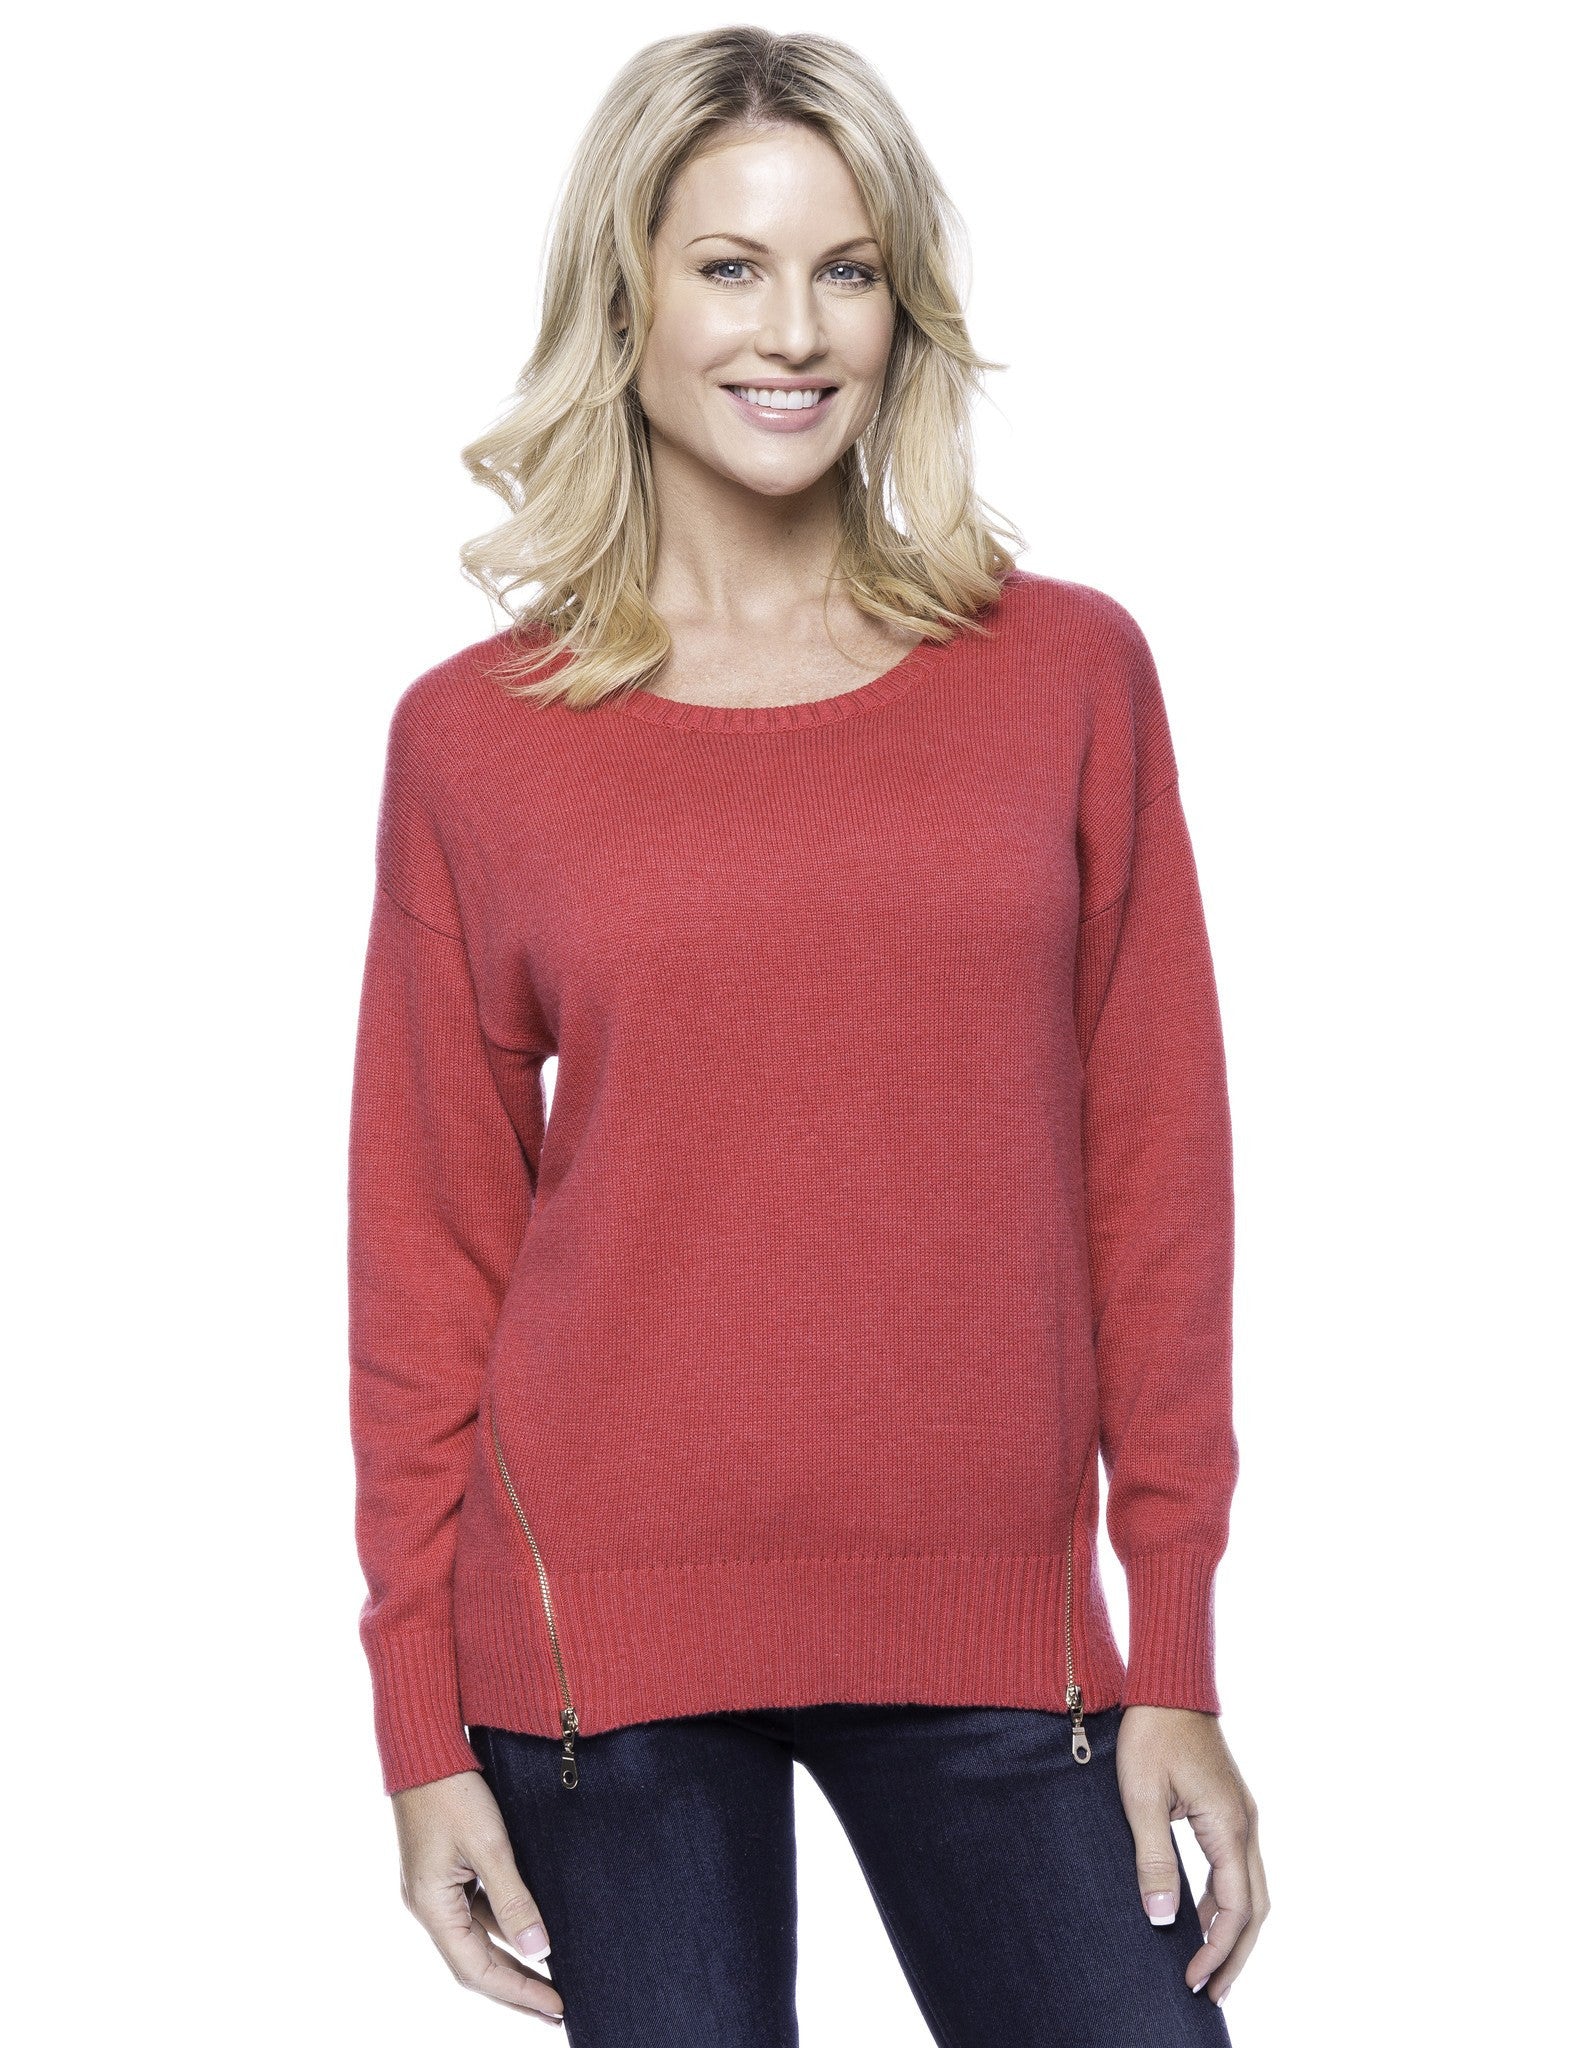 Box-Packaged Tocco Reale Women's Cashmere Blend Crew Neck Sweater with Side Zip